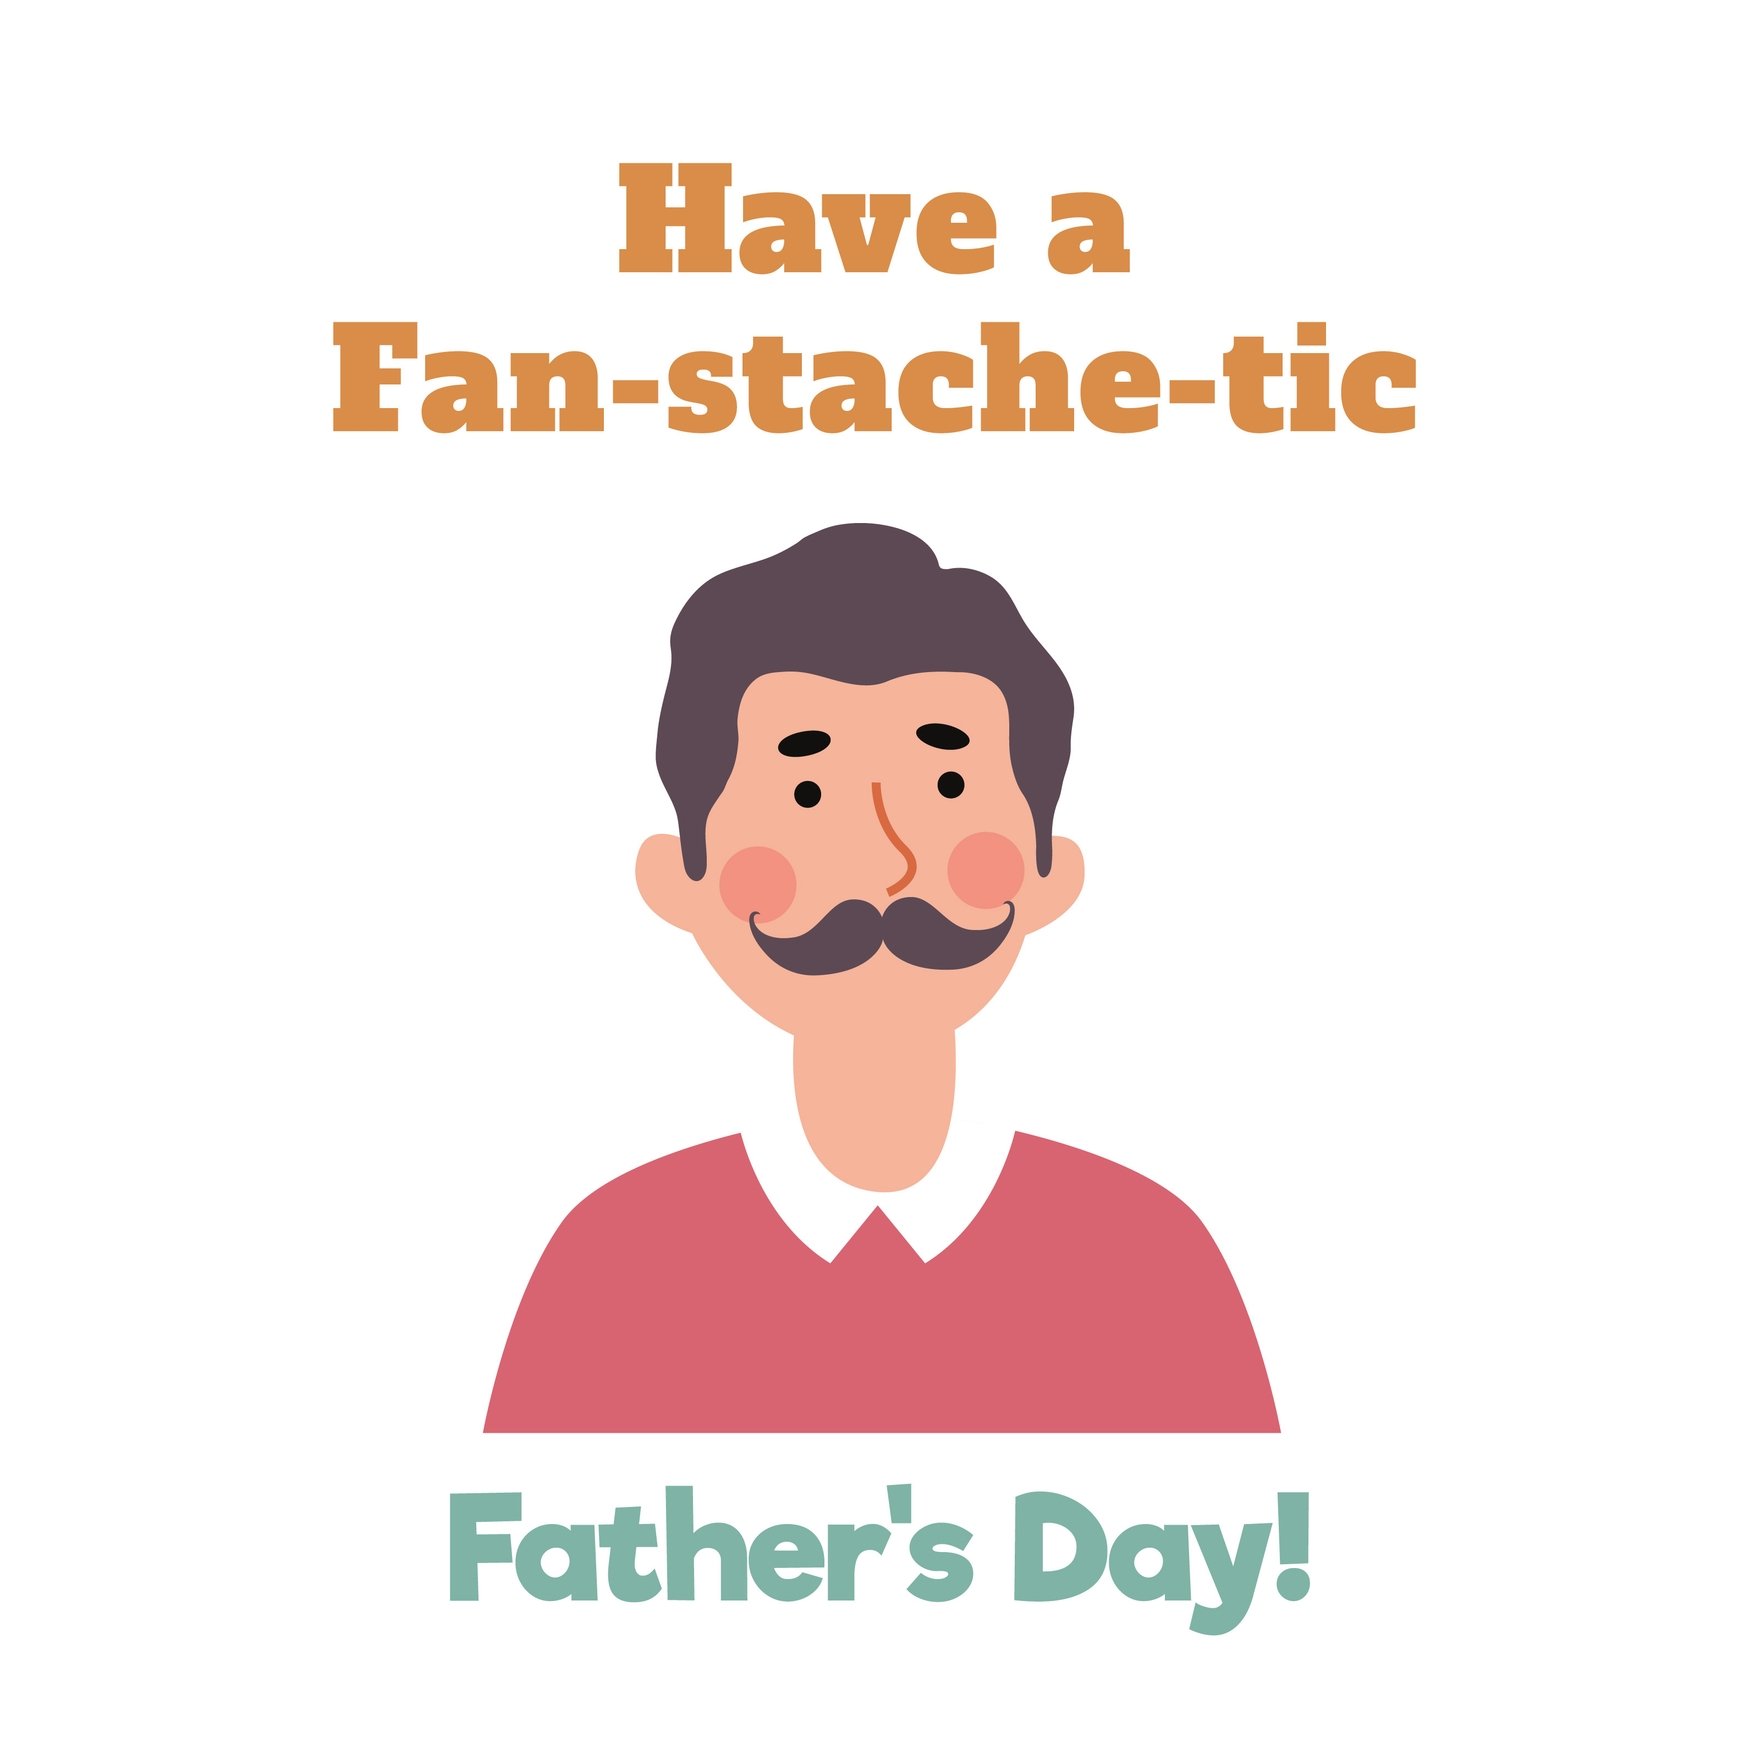 Funny Happy Father's Day Gif in Illustrator, EPS, SVG, JPG, GIF, PNG, After Effects